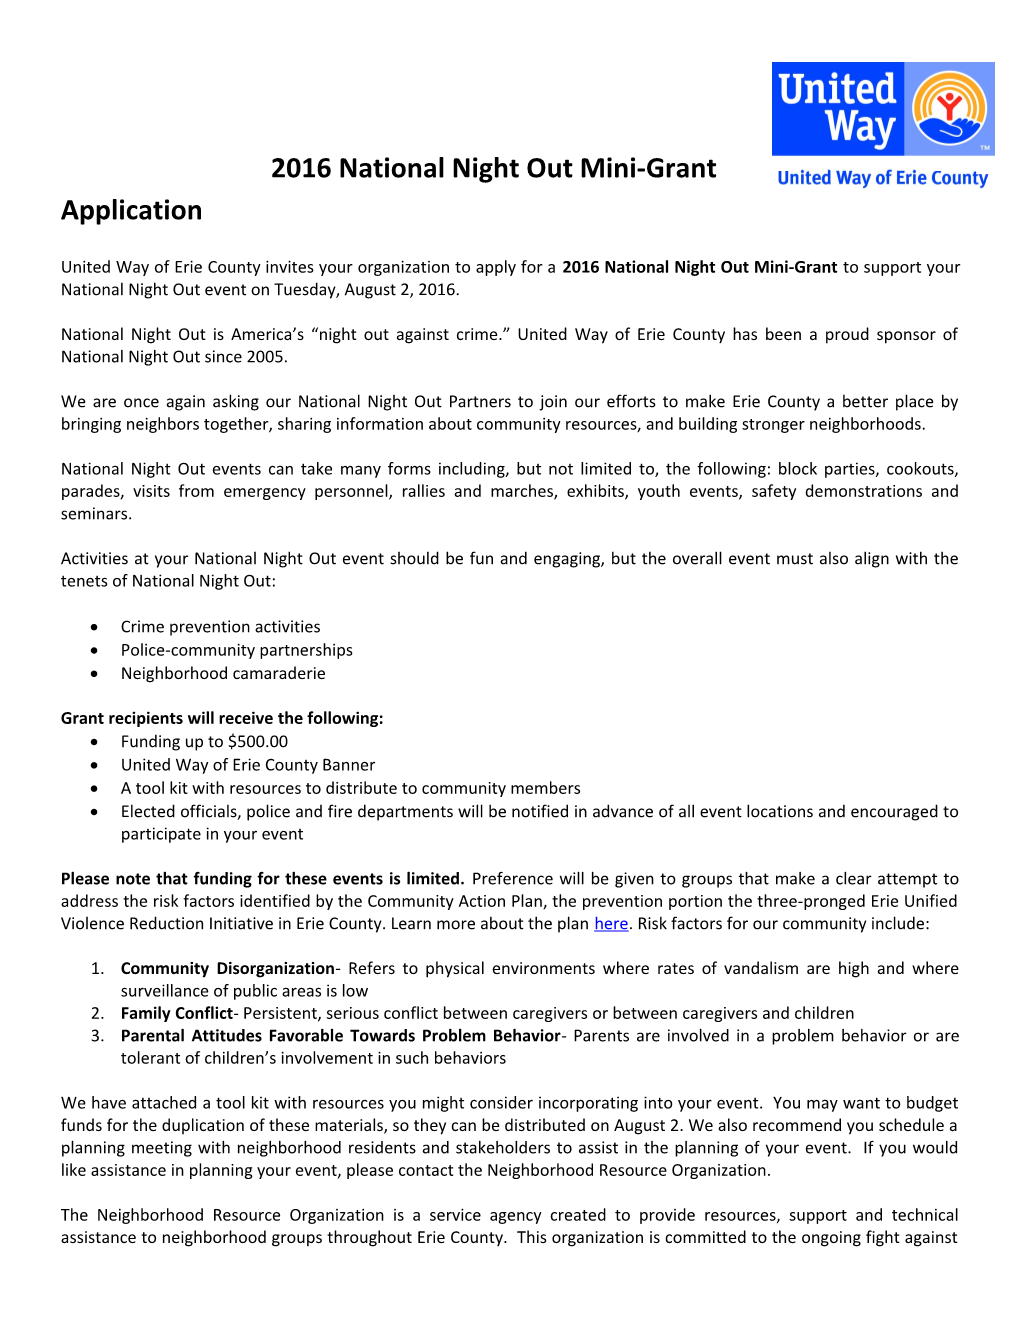 2016 National Night out Mini-Grant Application